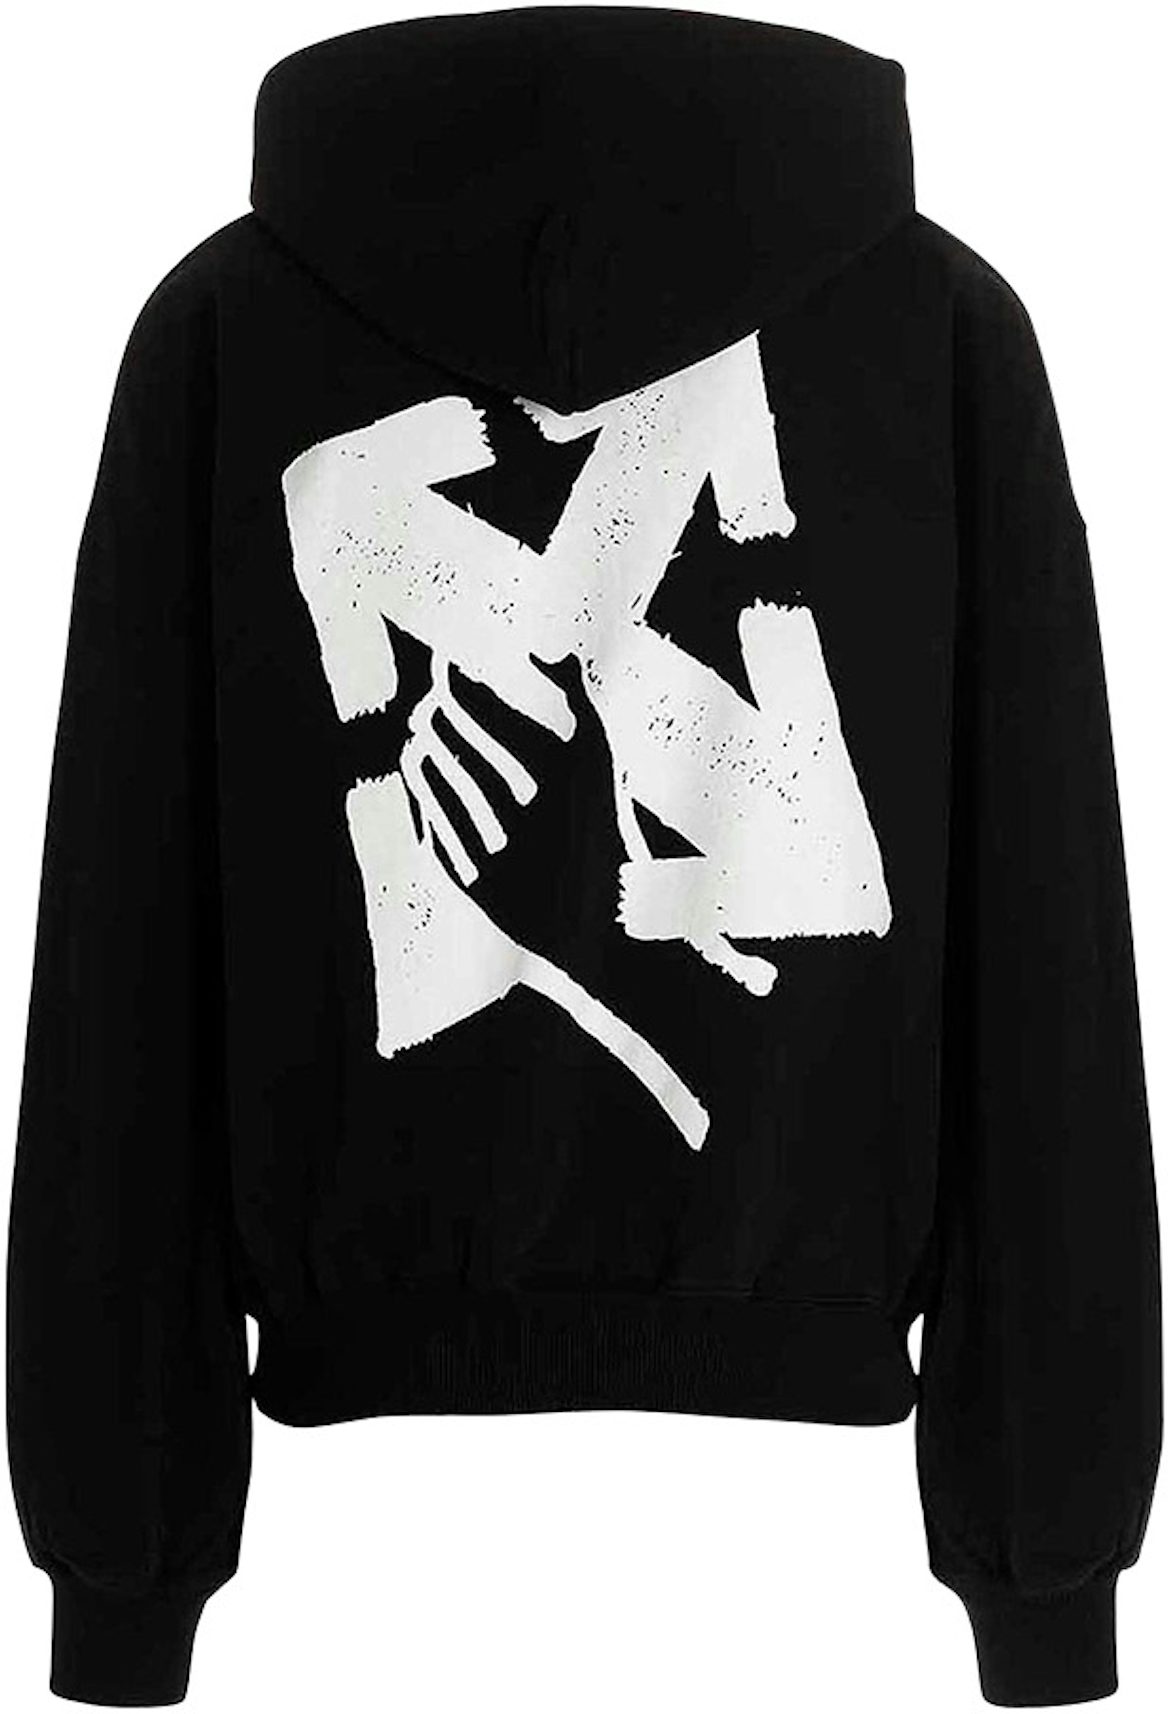 Off-White c/o Virgil Abloh Spider Arrows Print Hoodie in Black for